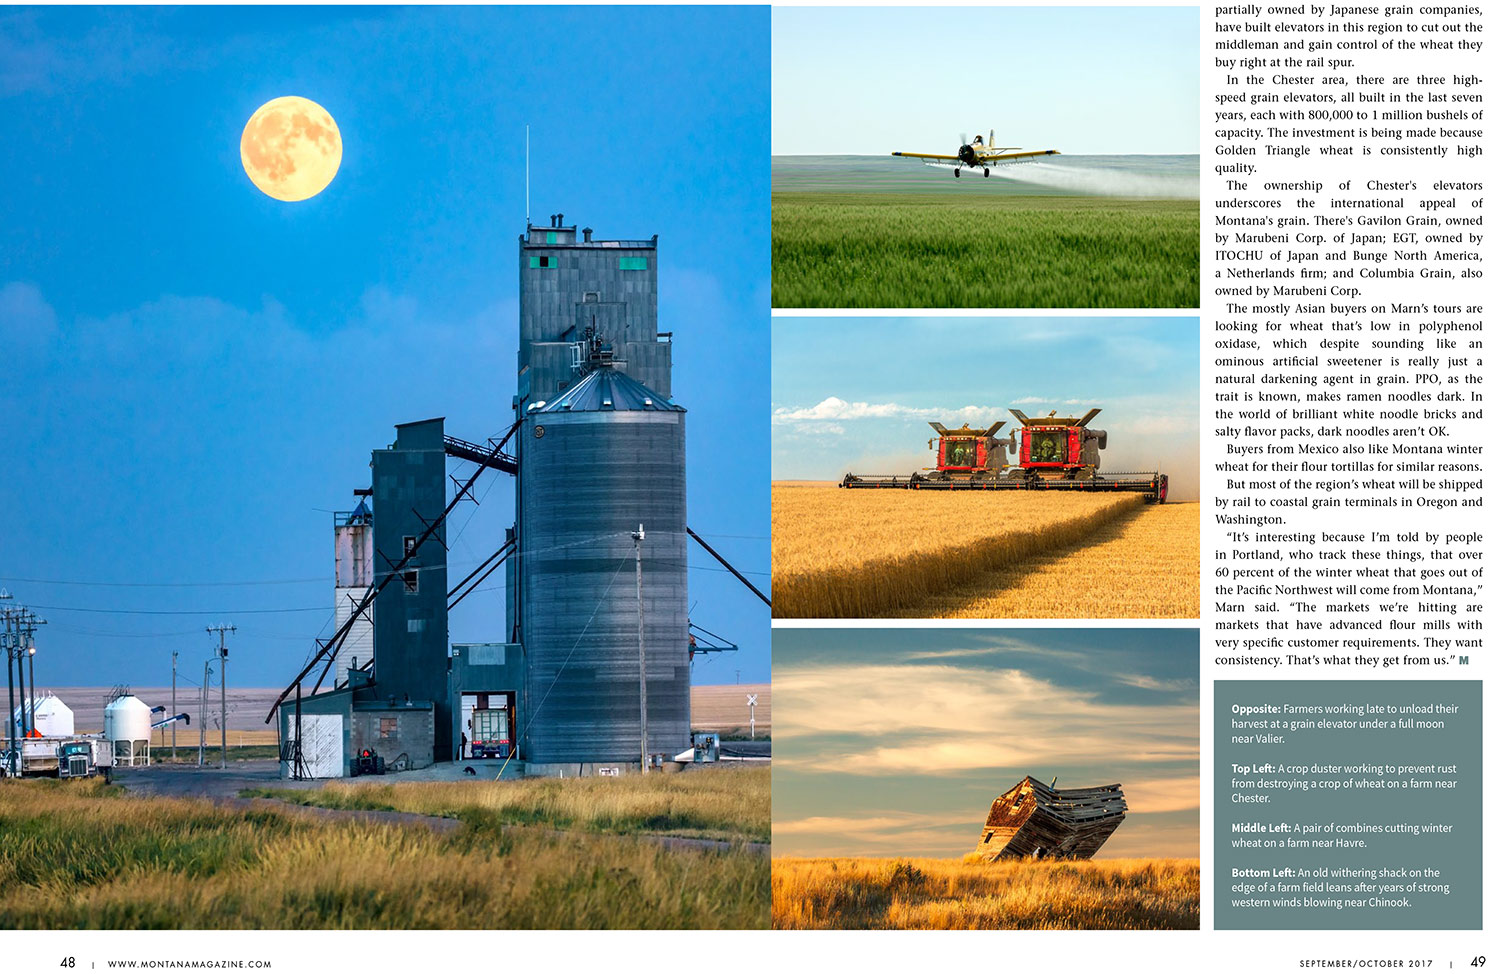 Agriculture Photos of Montana's Golden Triangle